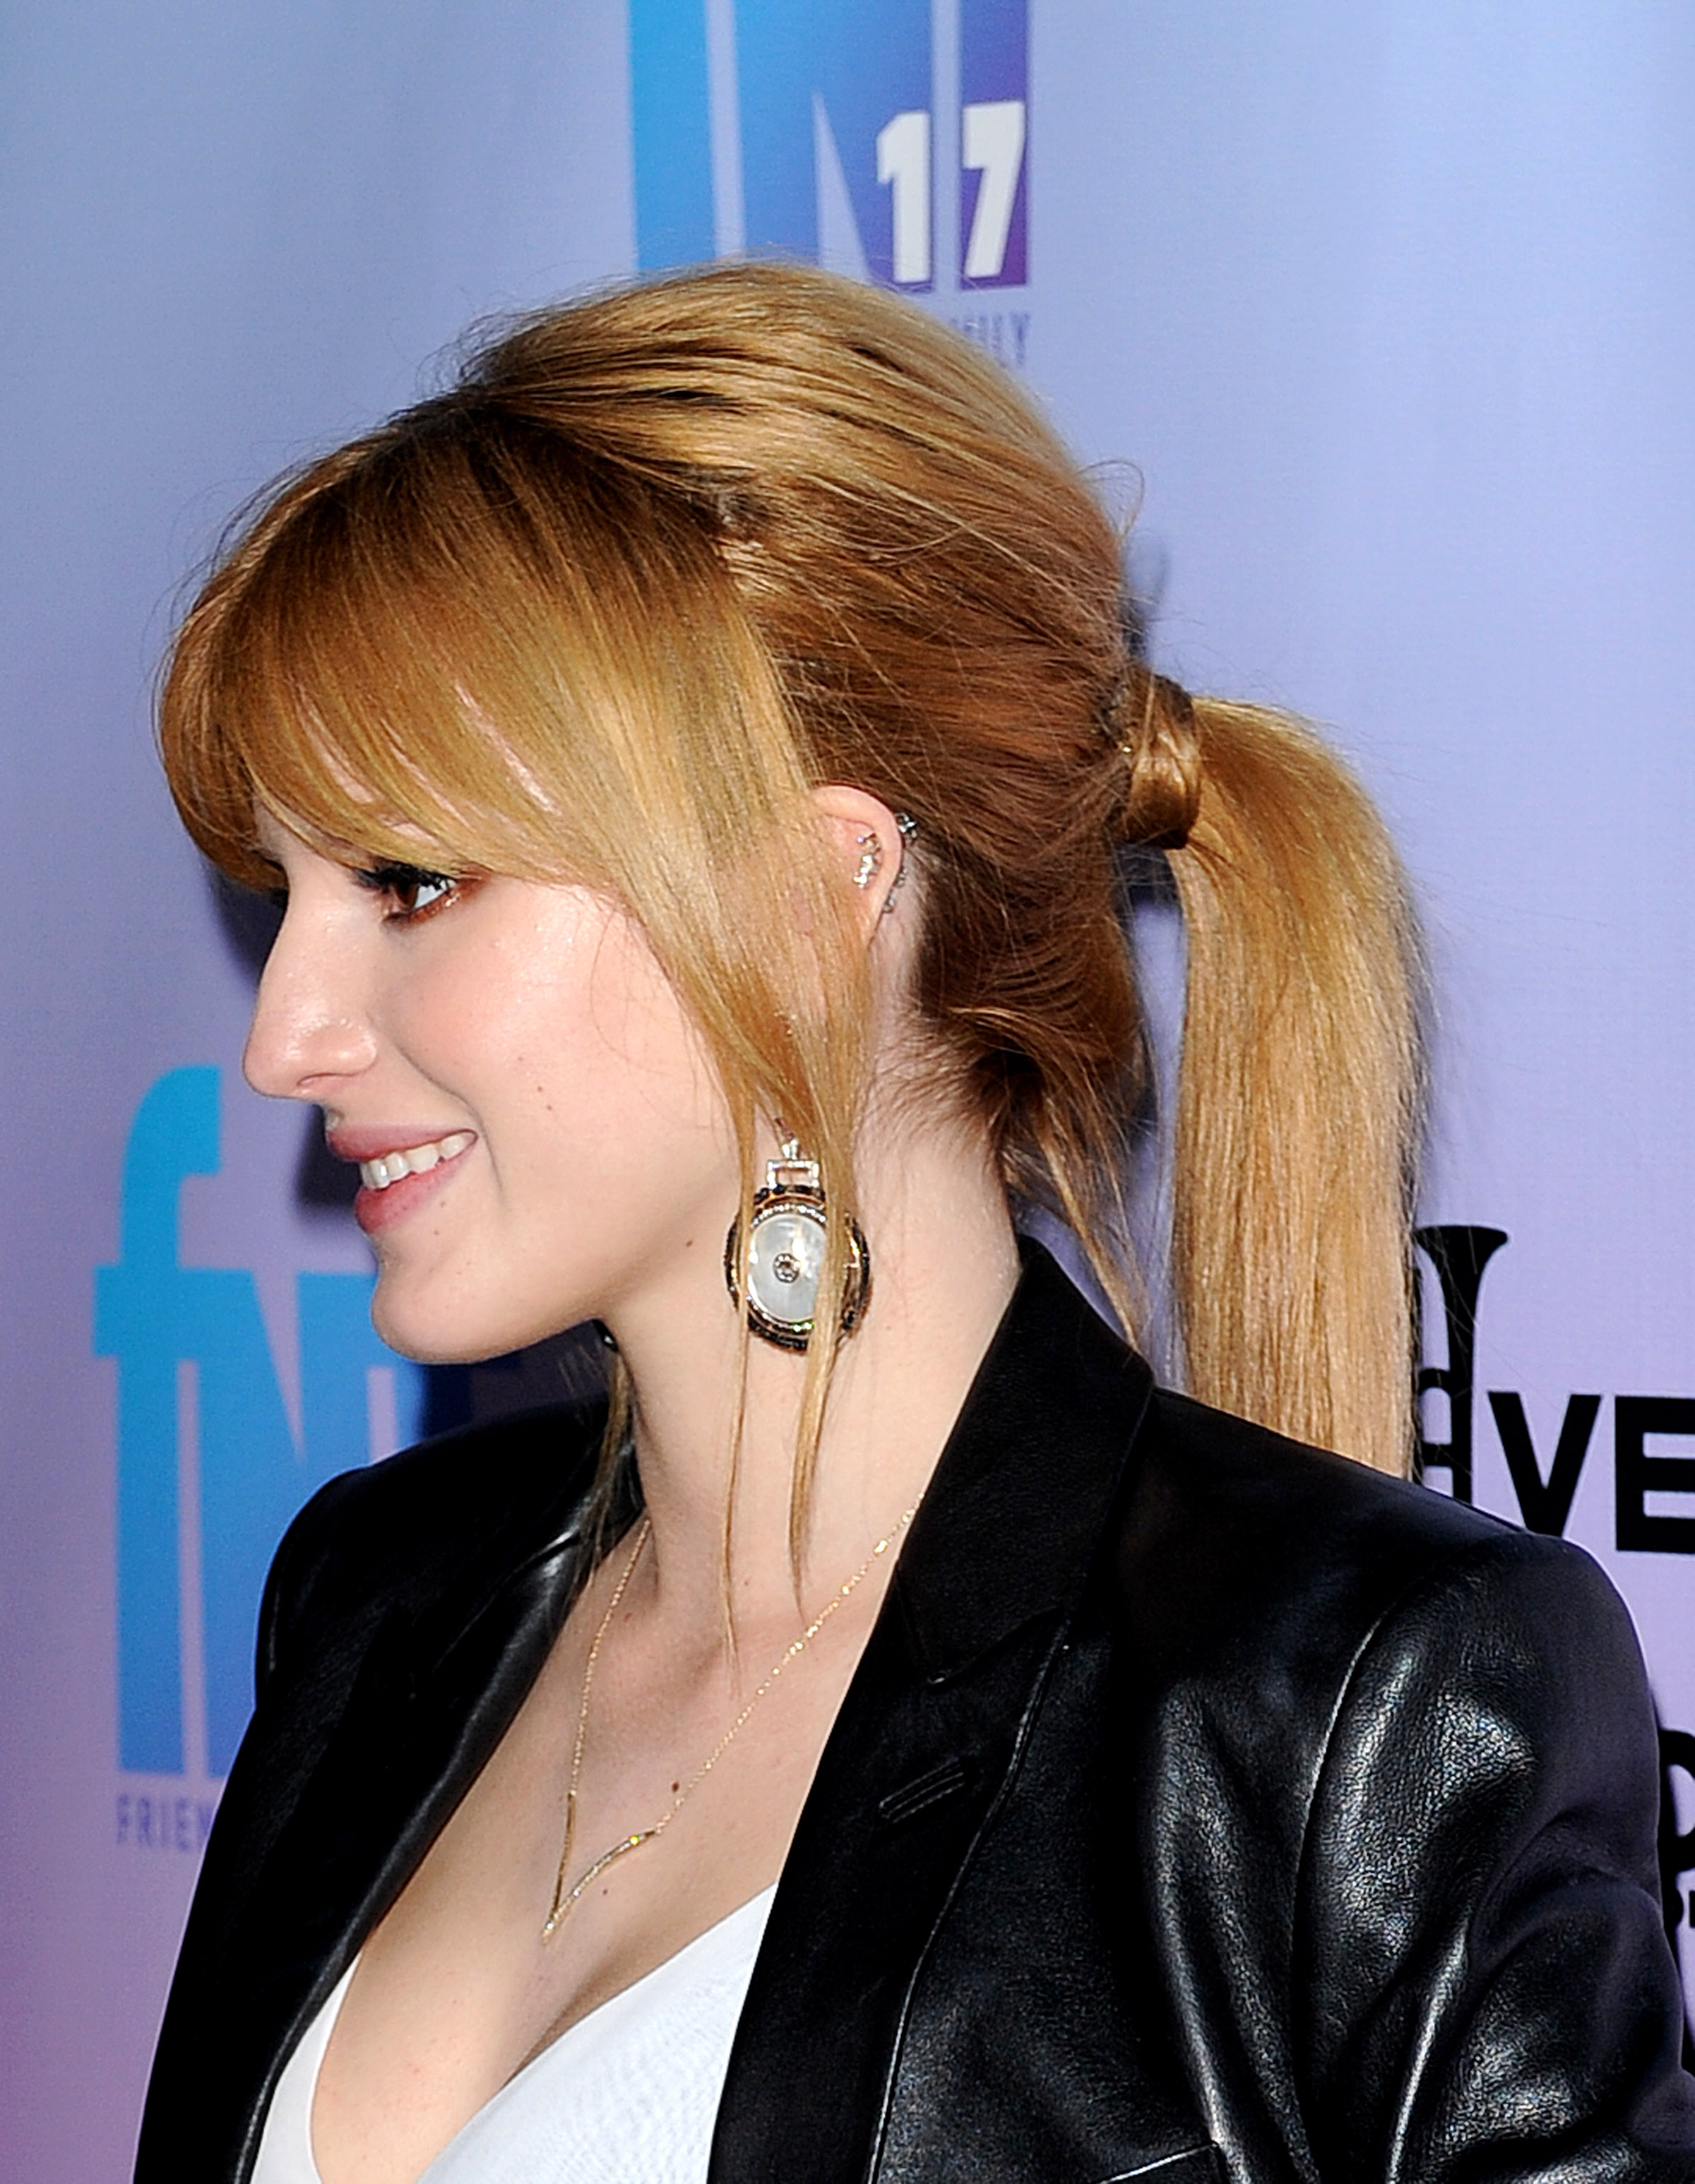 Previous Gallery of Bella Thorne. 